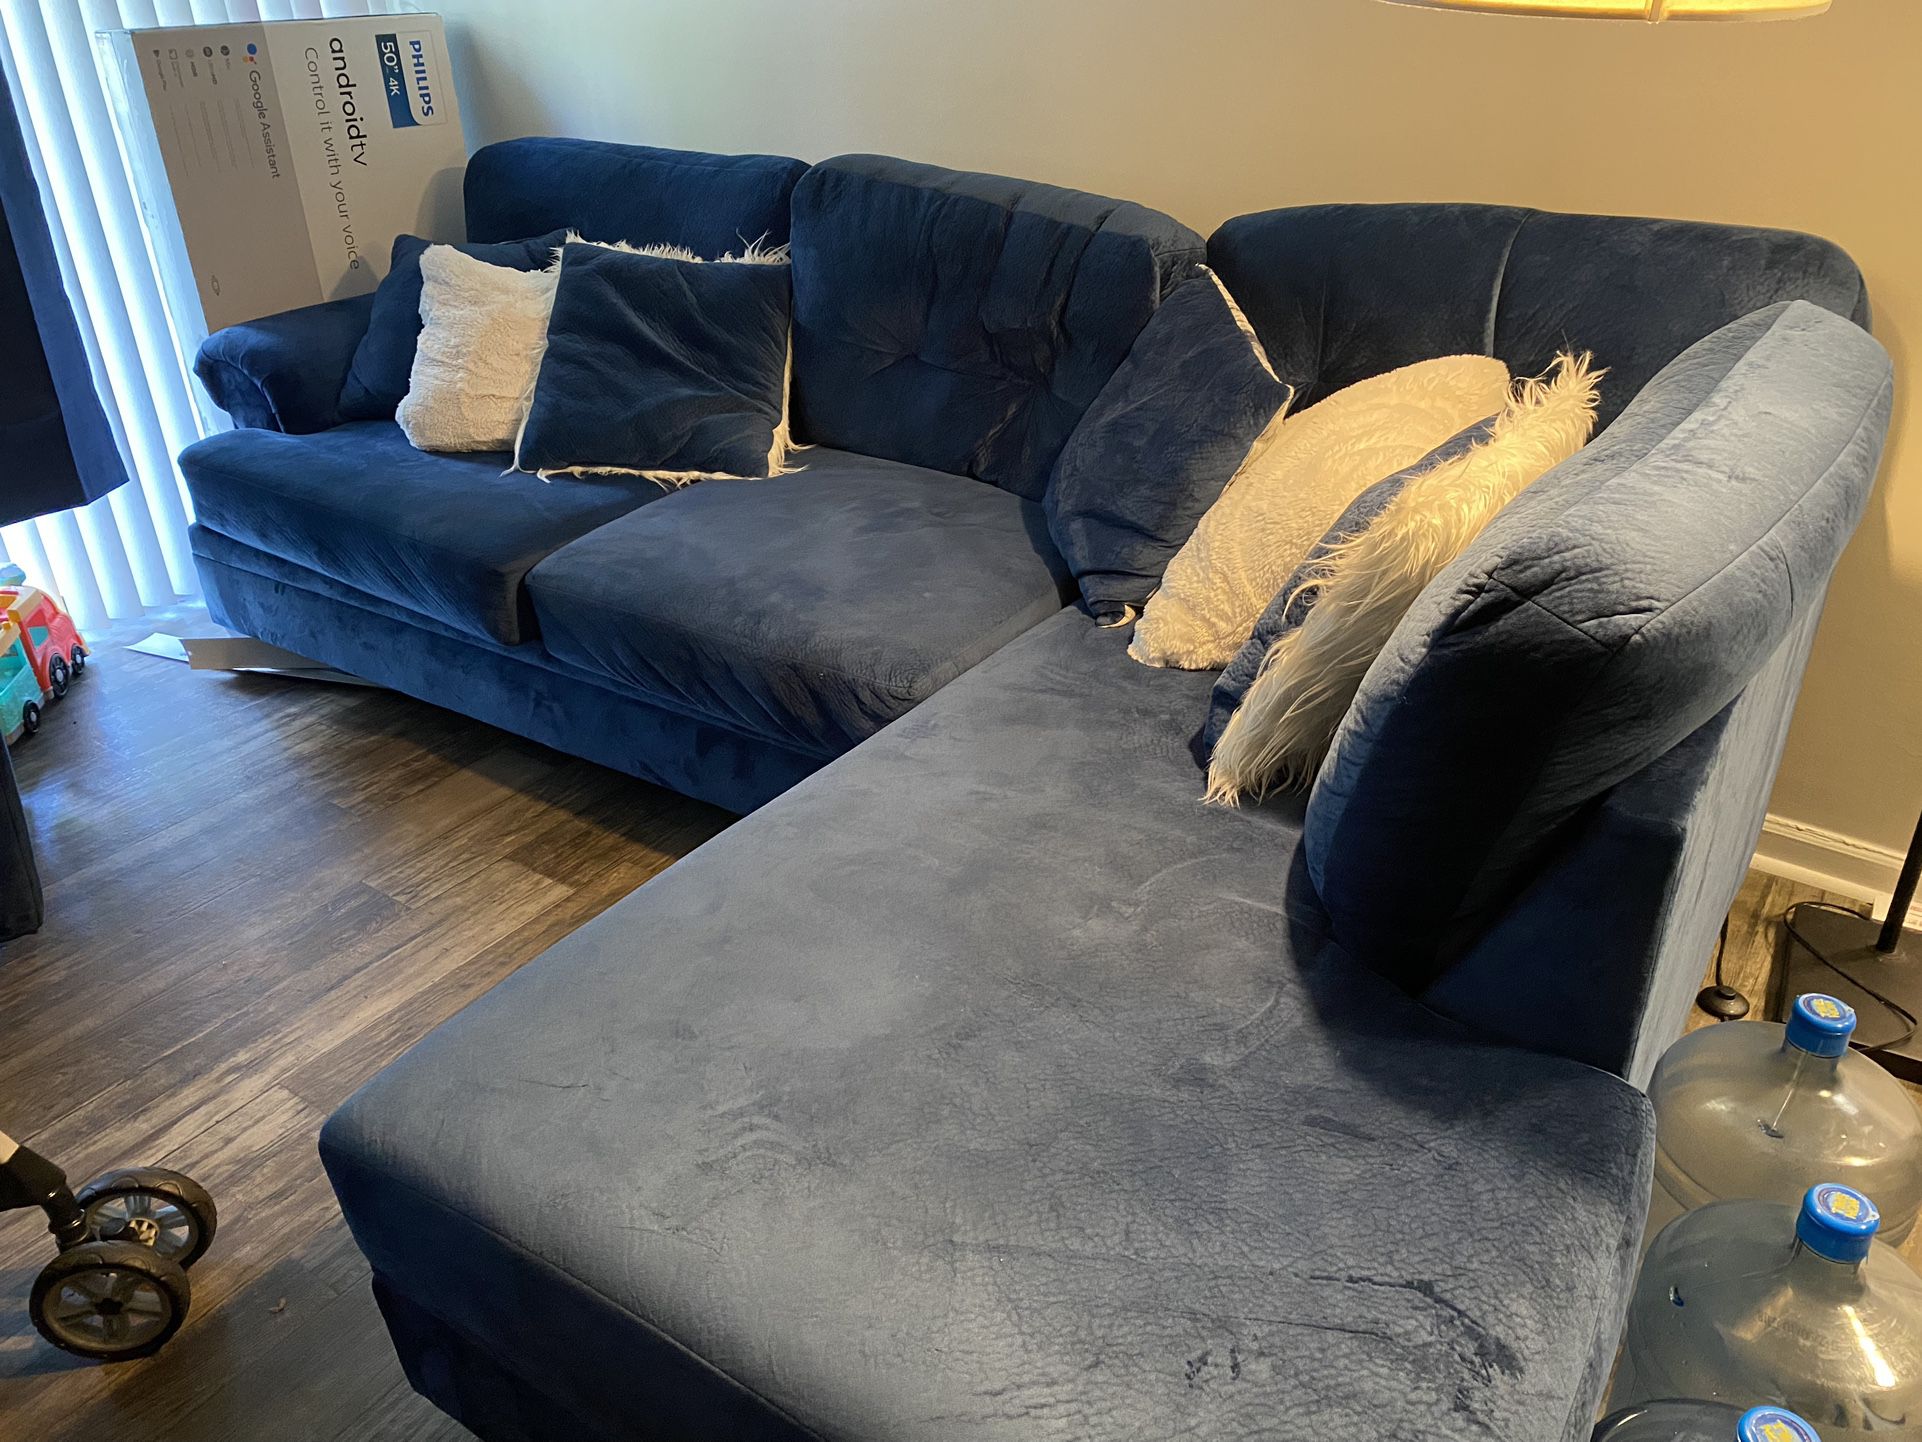 Couch and Recliner Set For Sale!